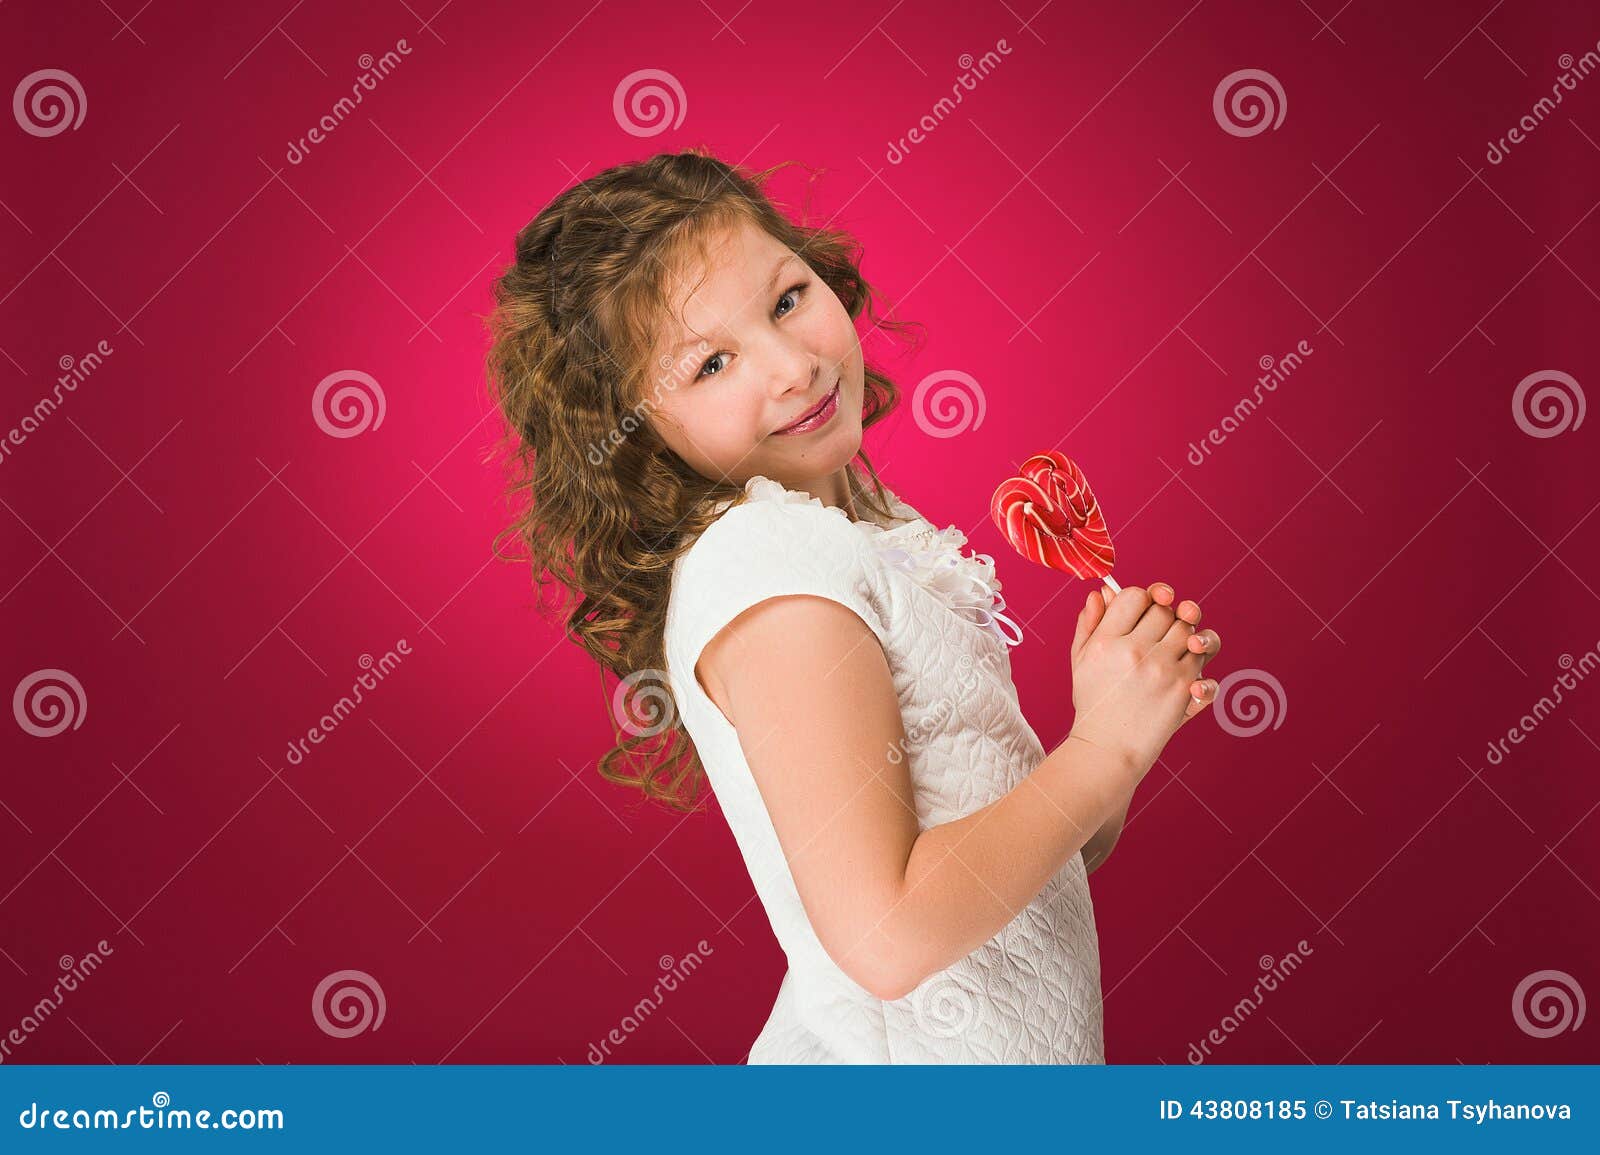 Lollipop. The Girl With A Sweet Heart-shaped Candy Stock Image - Image ...